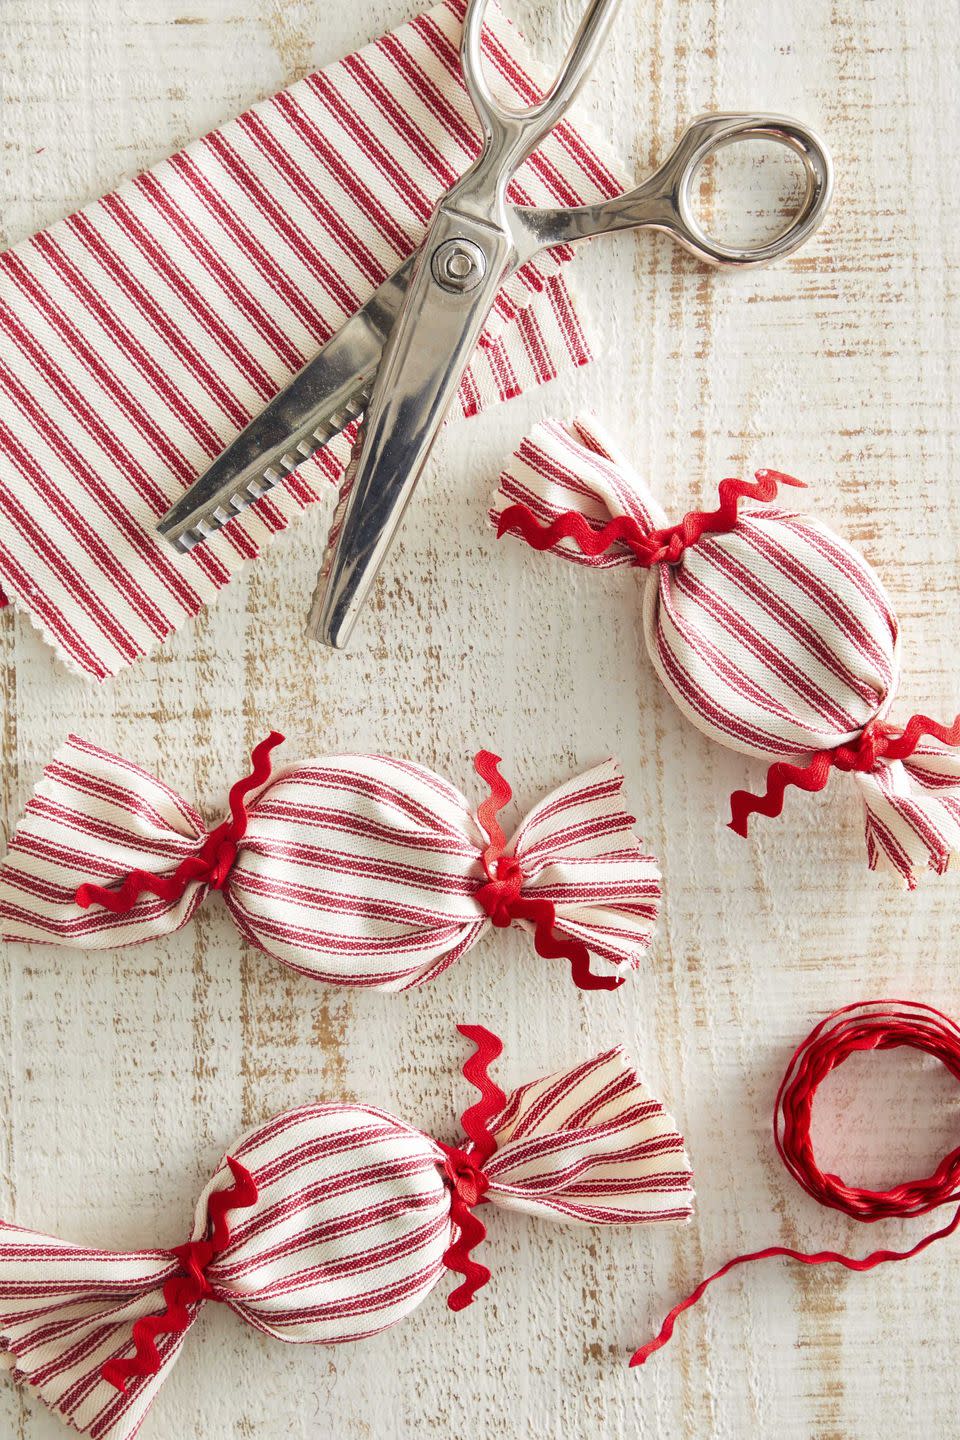 striped red and white fabric crafted to look like oversize peppermints